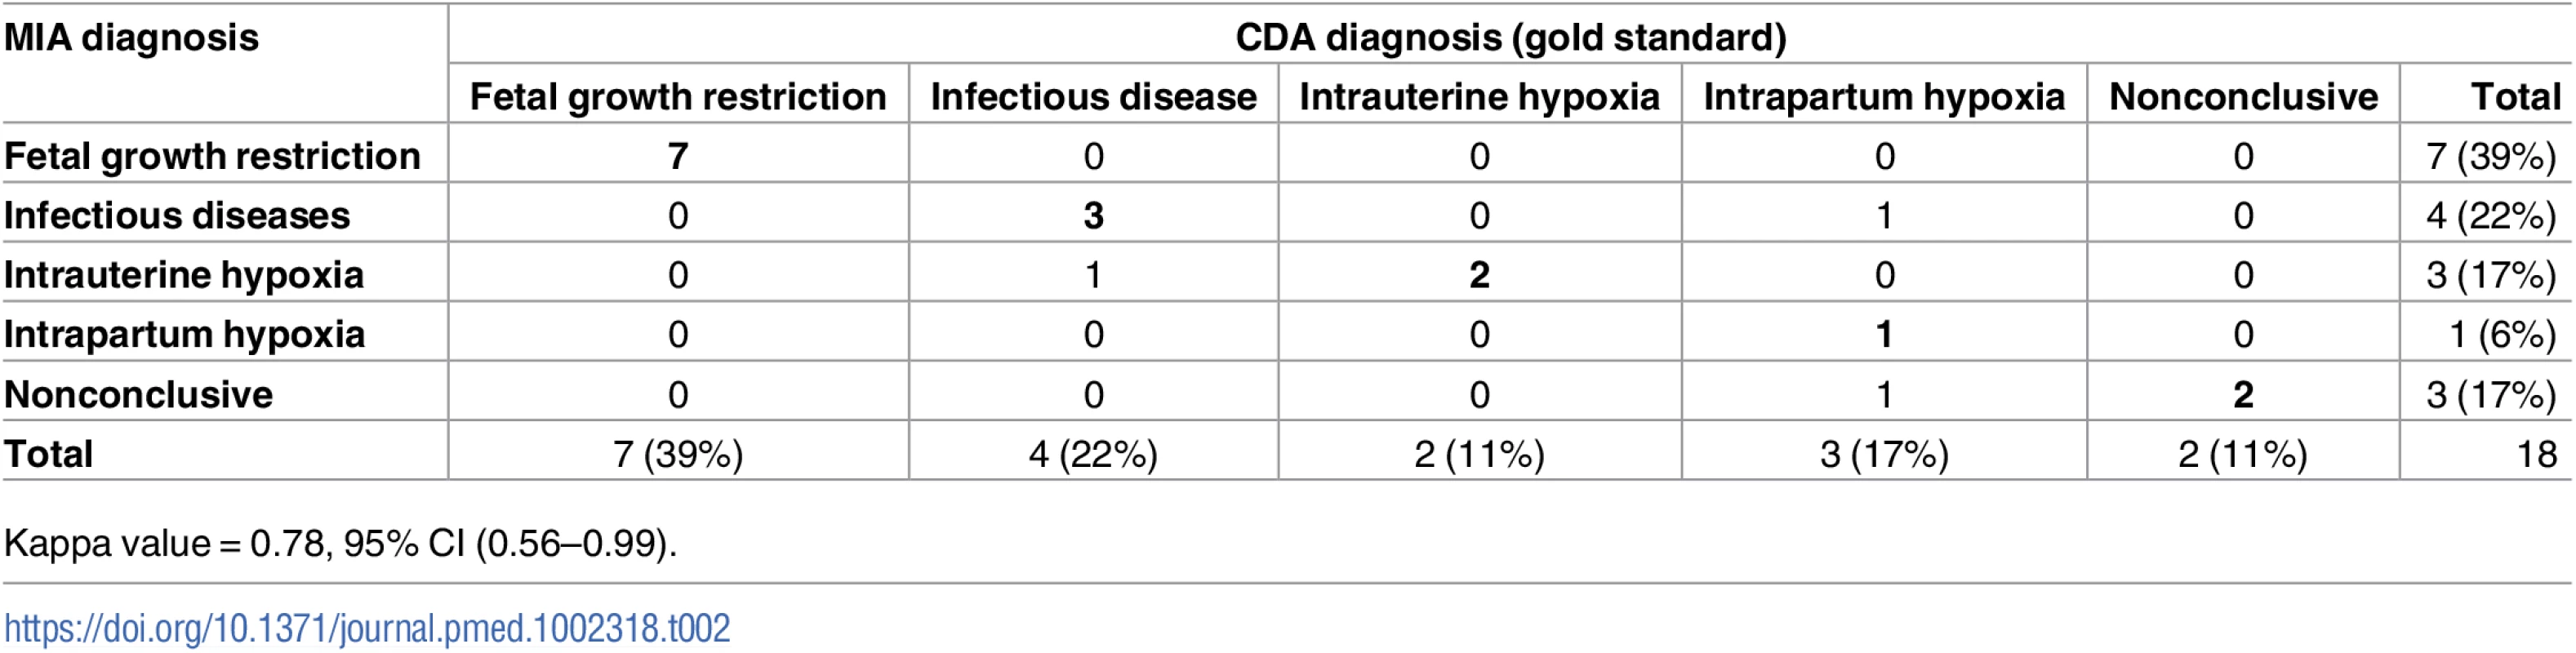 Concordance of the categorization of the causes of death established by the complete diagnostic autopsy (CDA, gold standard) and the minimally invasive autopsy (MIA) in stillbirths.